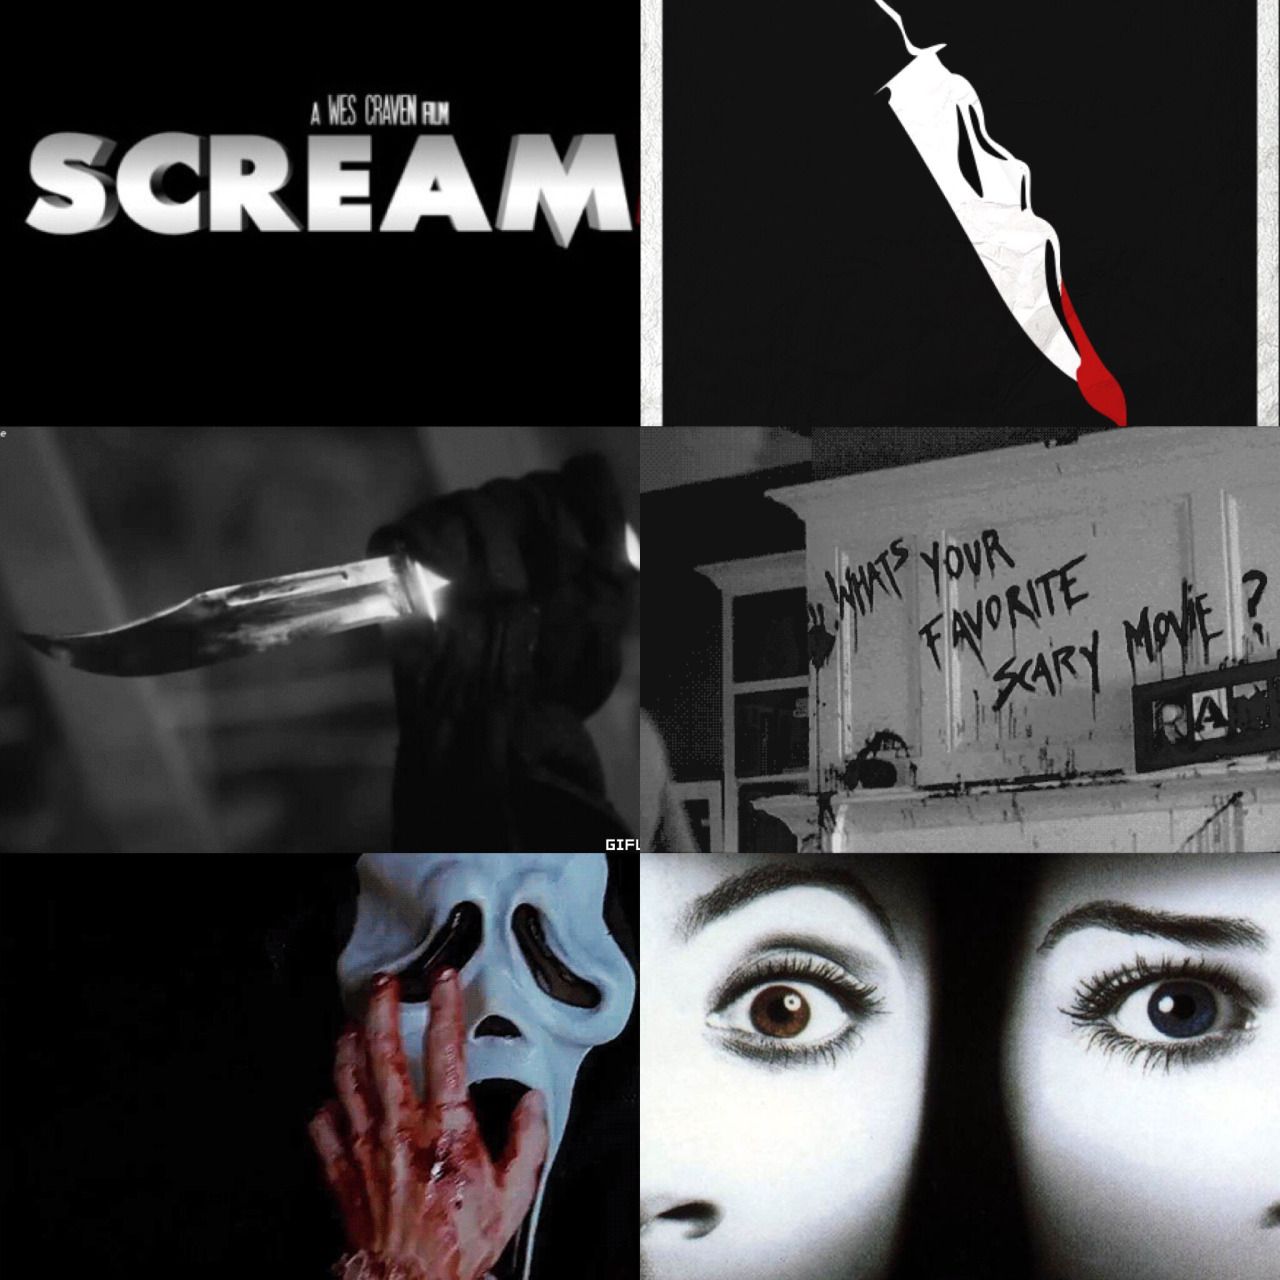 Horror aesthetic wallpapers background beautiful best available for download horror aesthetic photos free on images